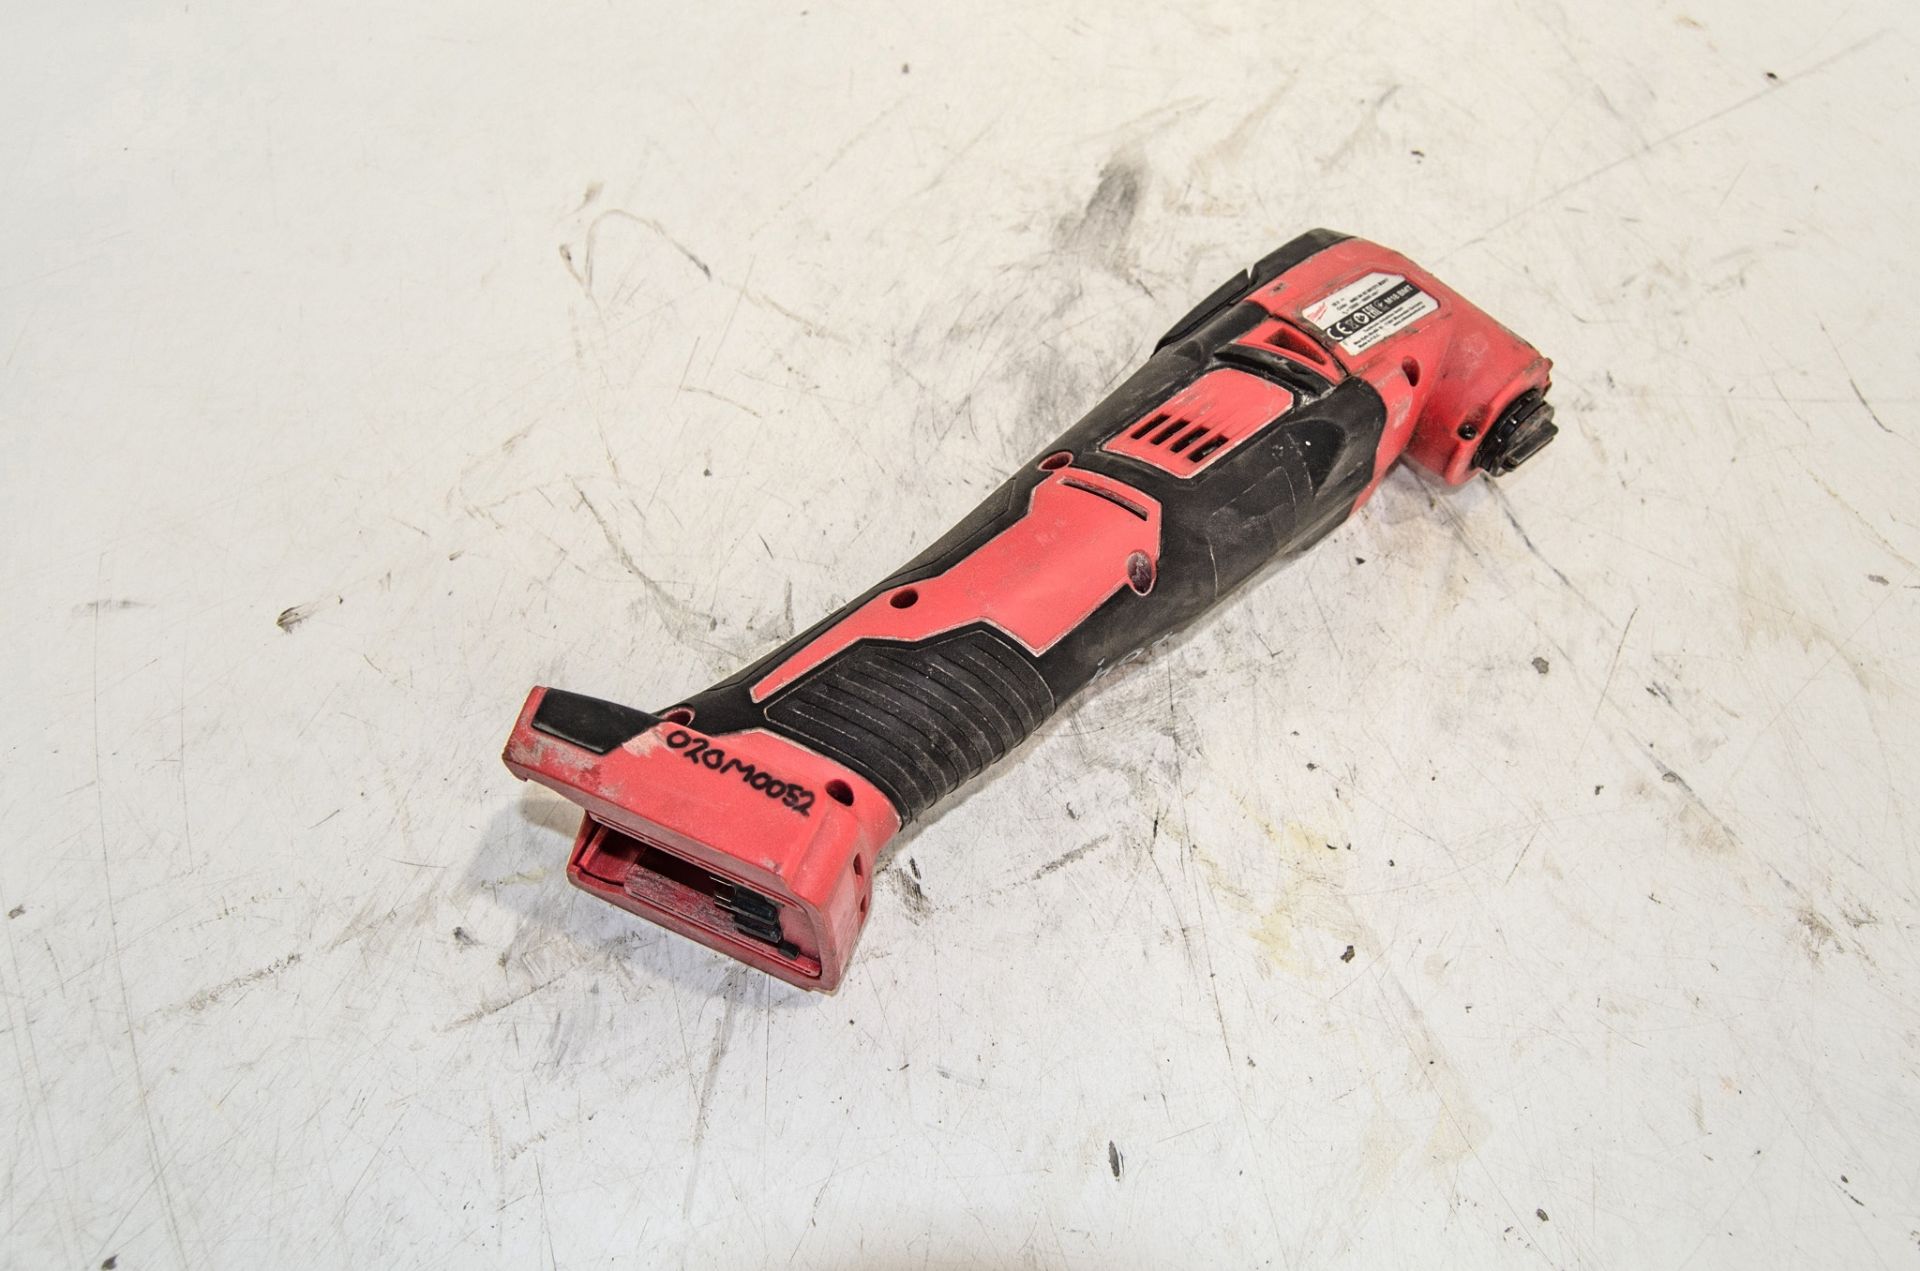 Milwaukee M18 BMT 18v cordless multi tool ** No battery or charger ** 020M0052 - Image 2 of 2